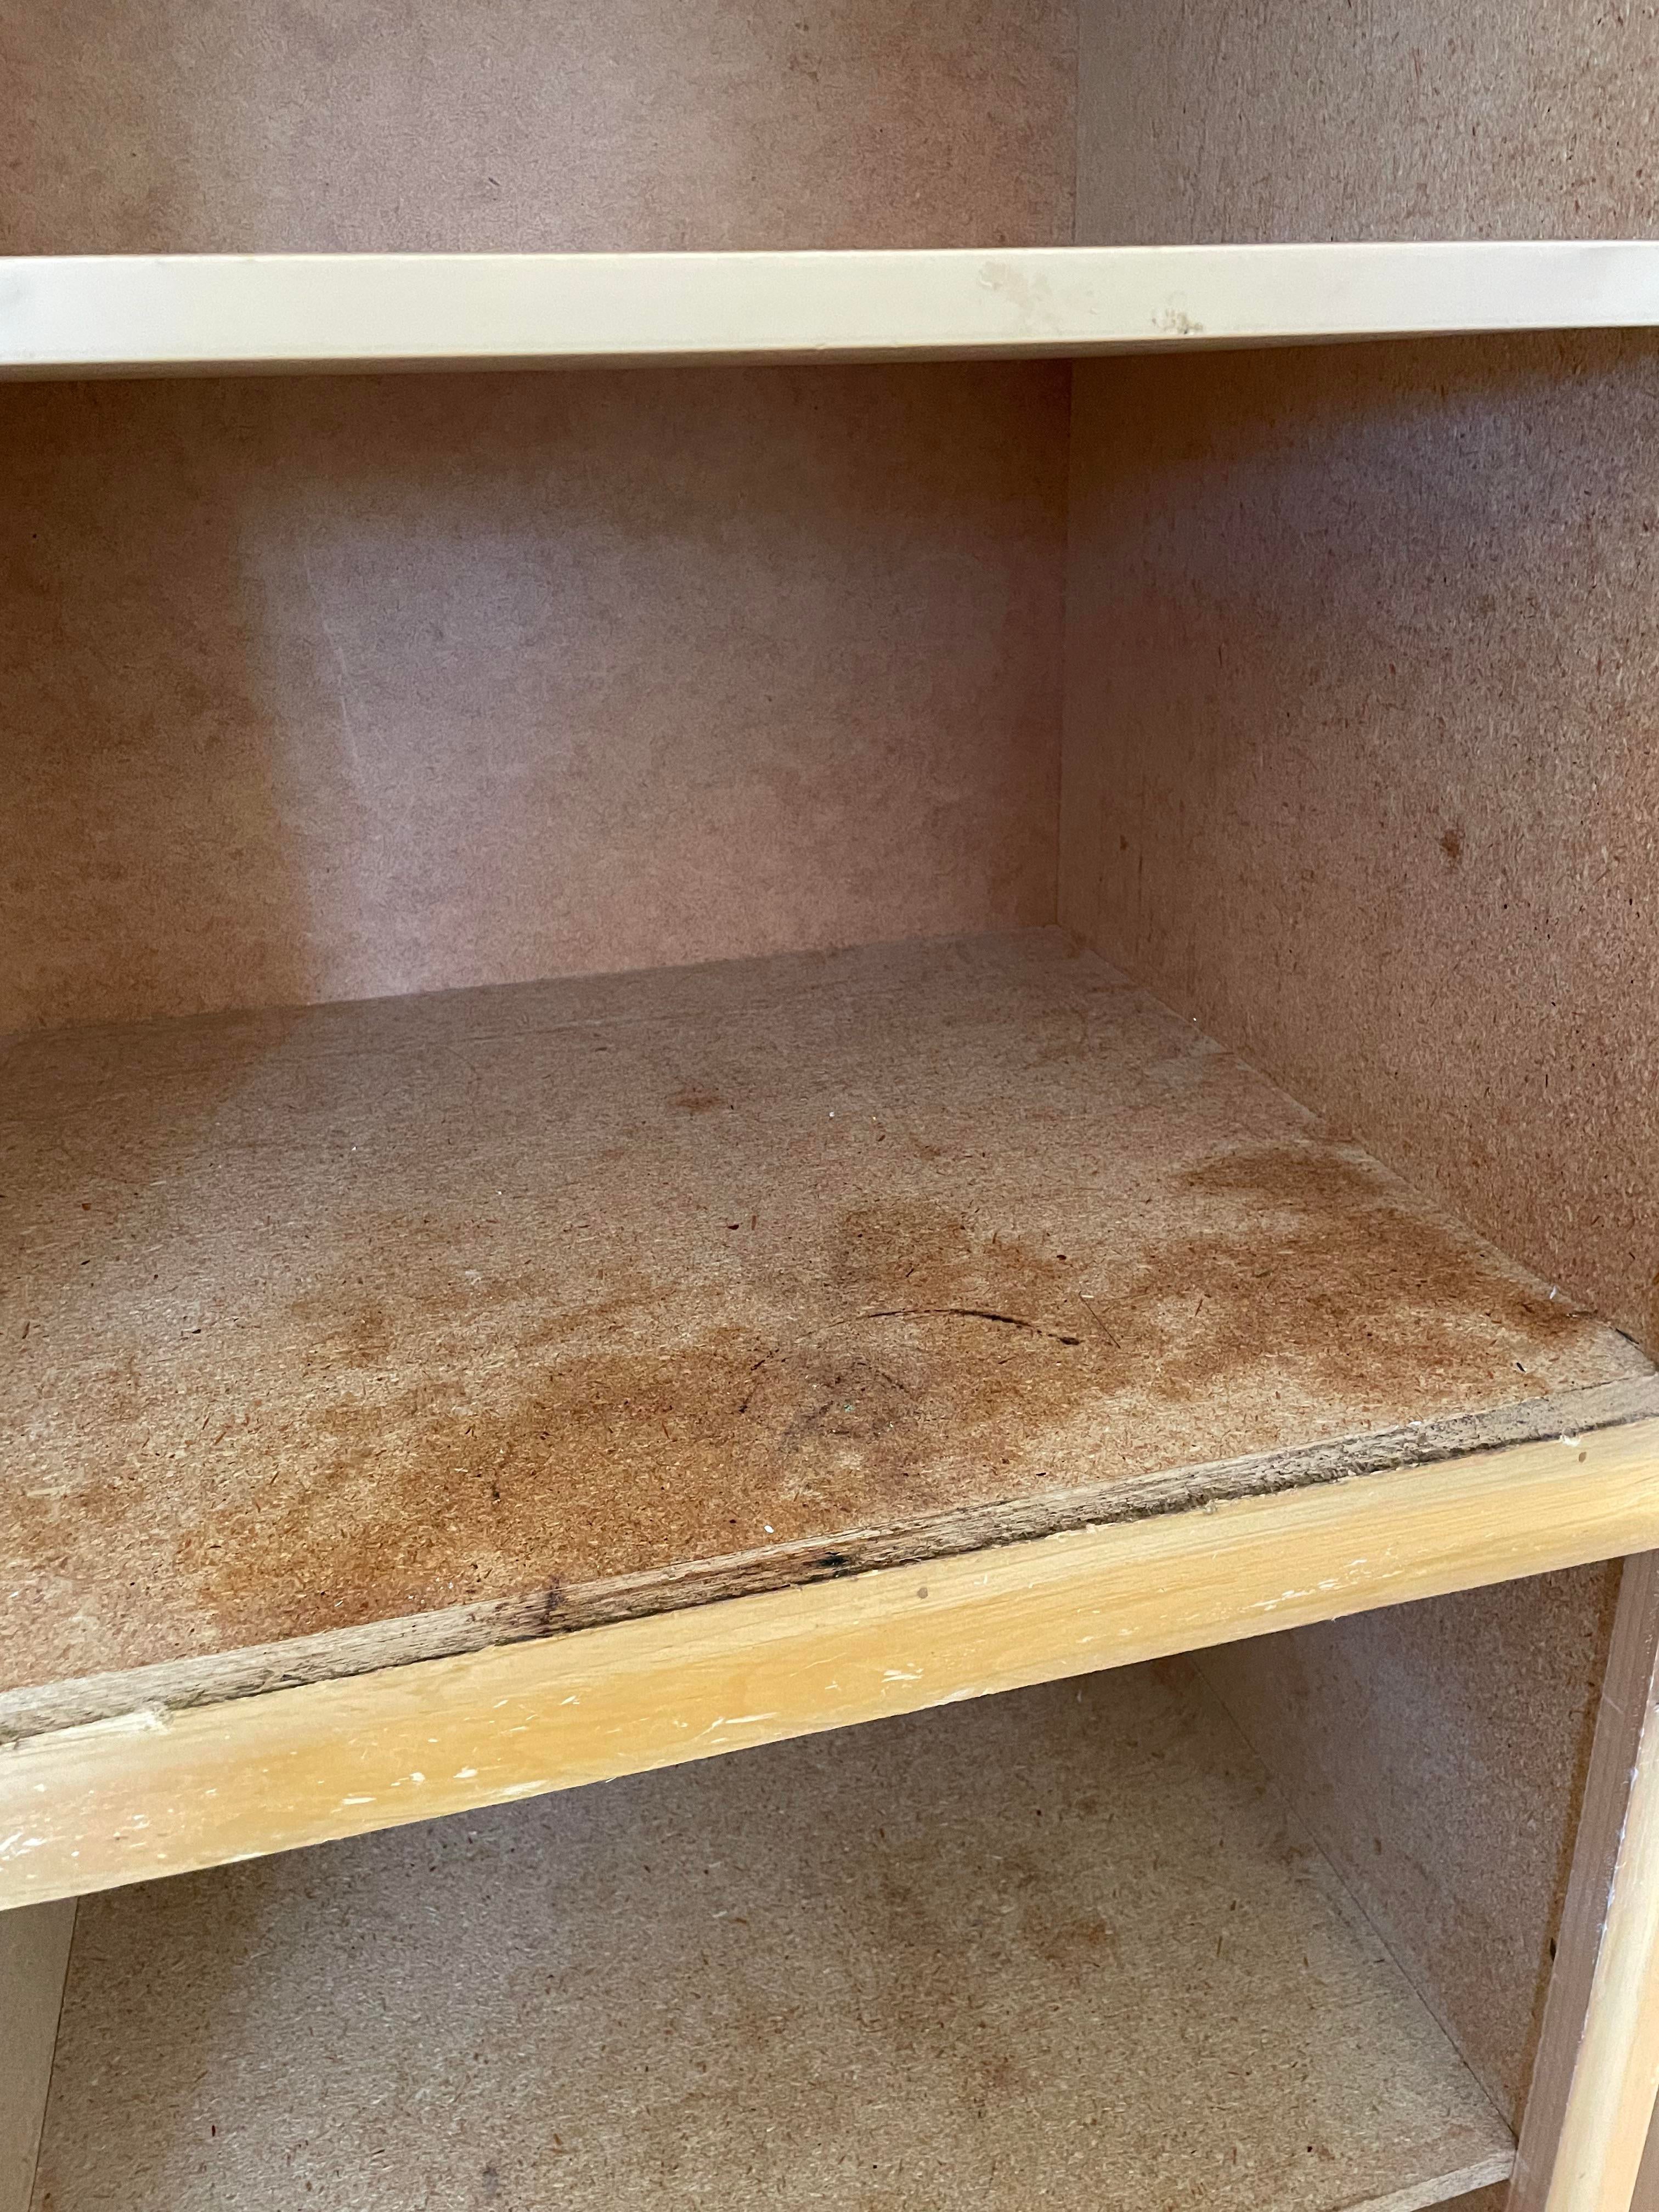 How to Clean Particle Board?